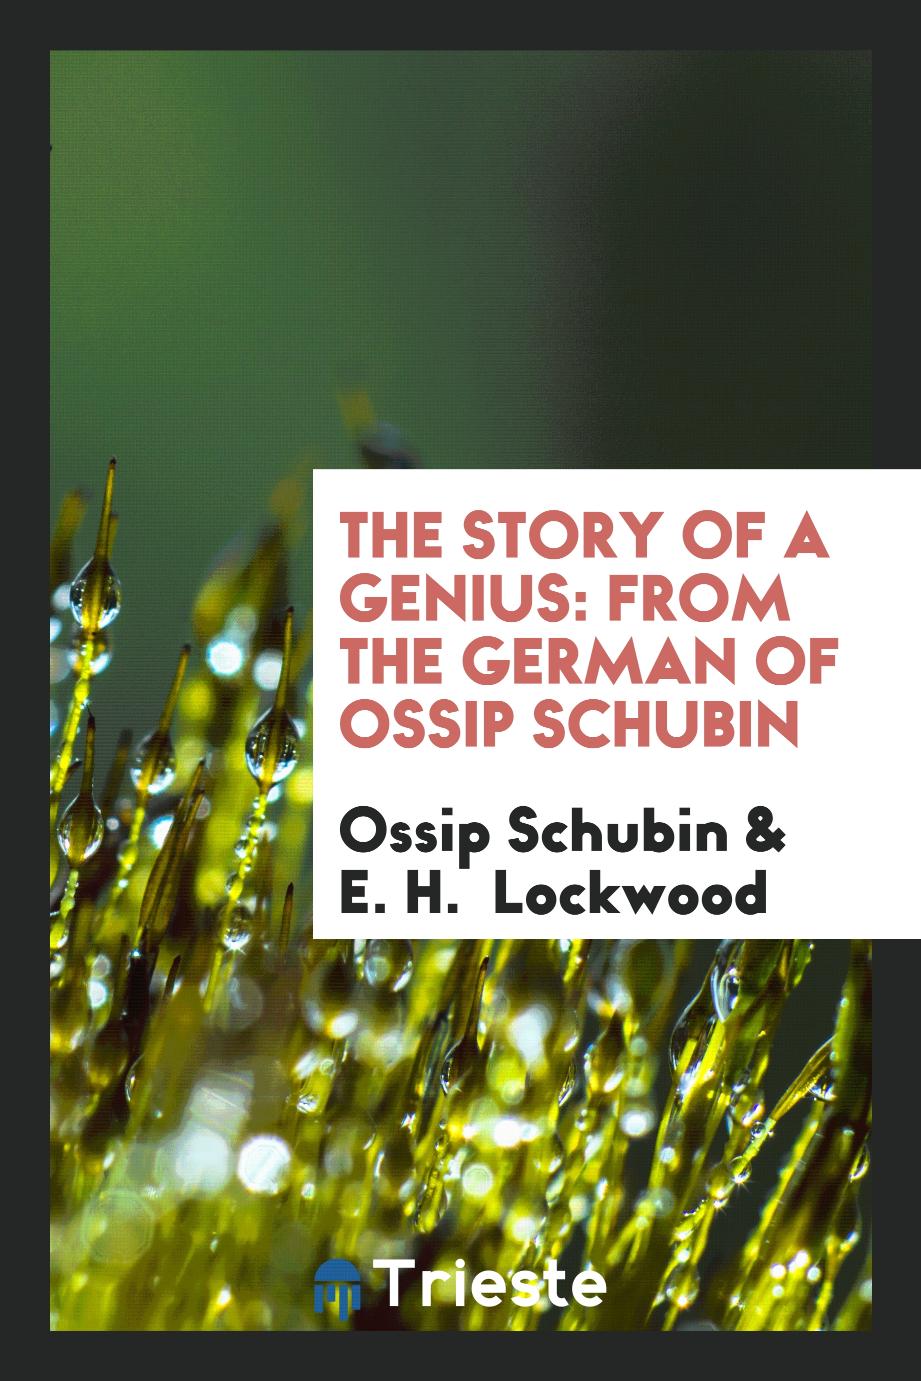 The Story of a Genius: From the German of Ossip Schubin